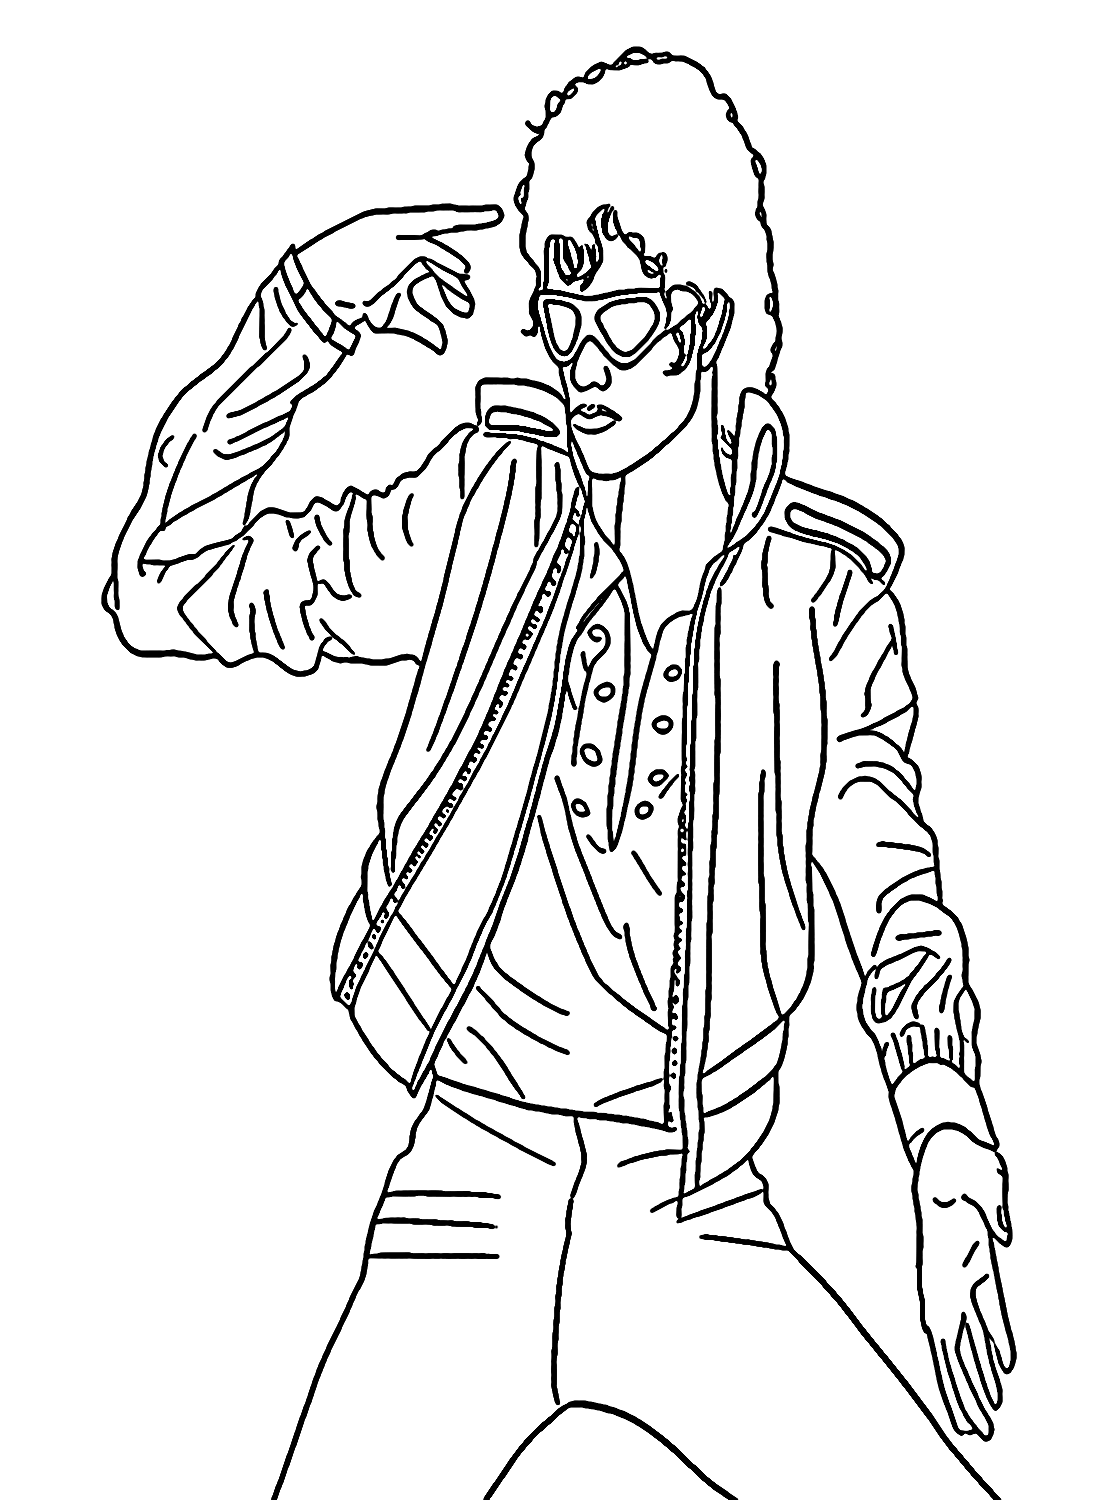 Michael Jackson Coloring Pages (100% Free Printables)